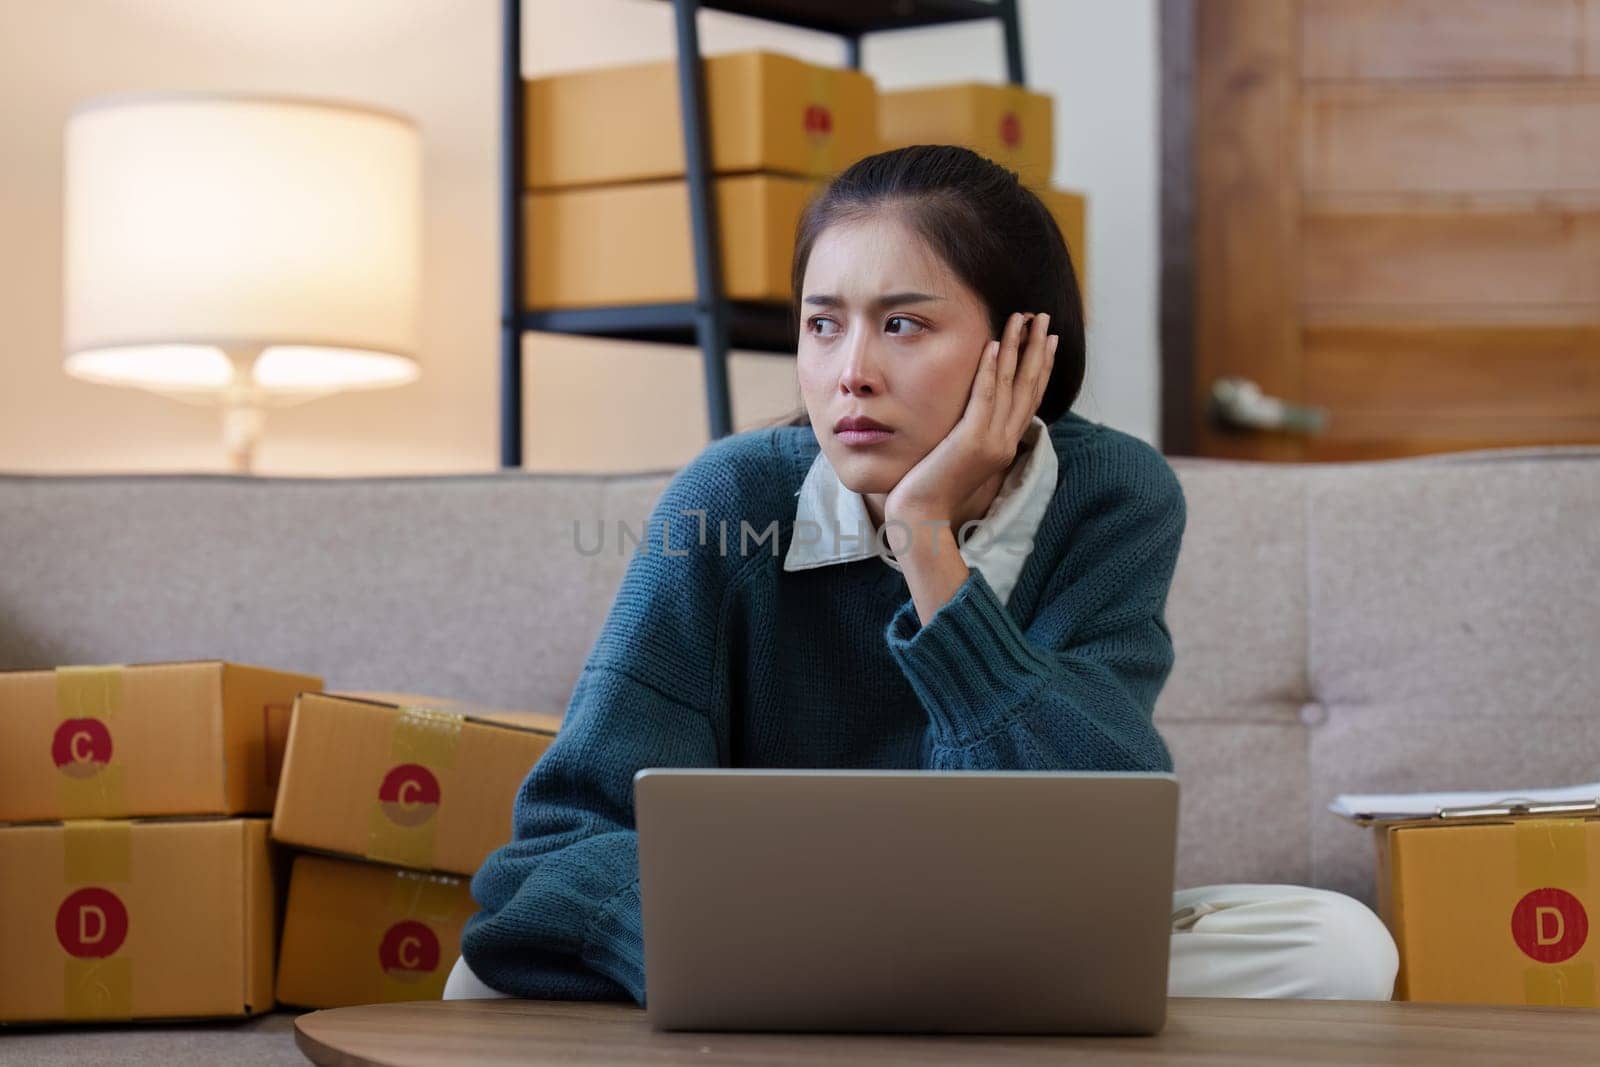 Small businesses SME owners female entrepreneurs stress while check online orders to prepare to pack the boxes, sell to customers, sme business ideas online.